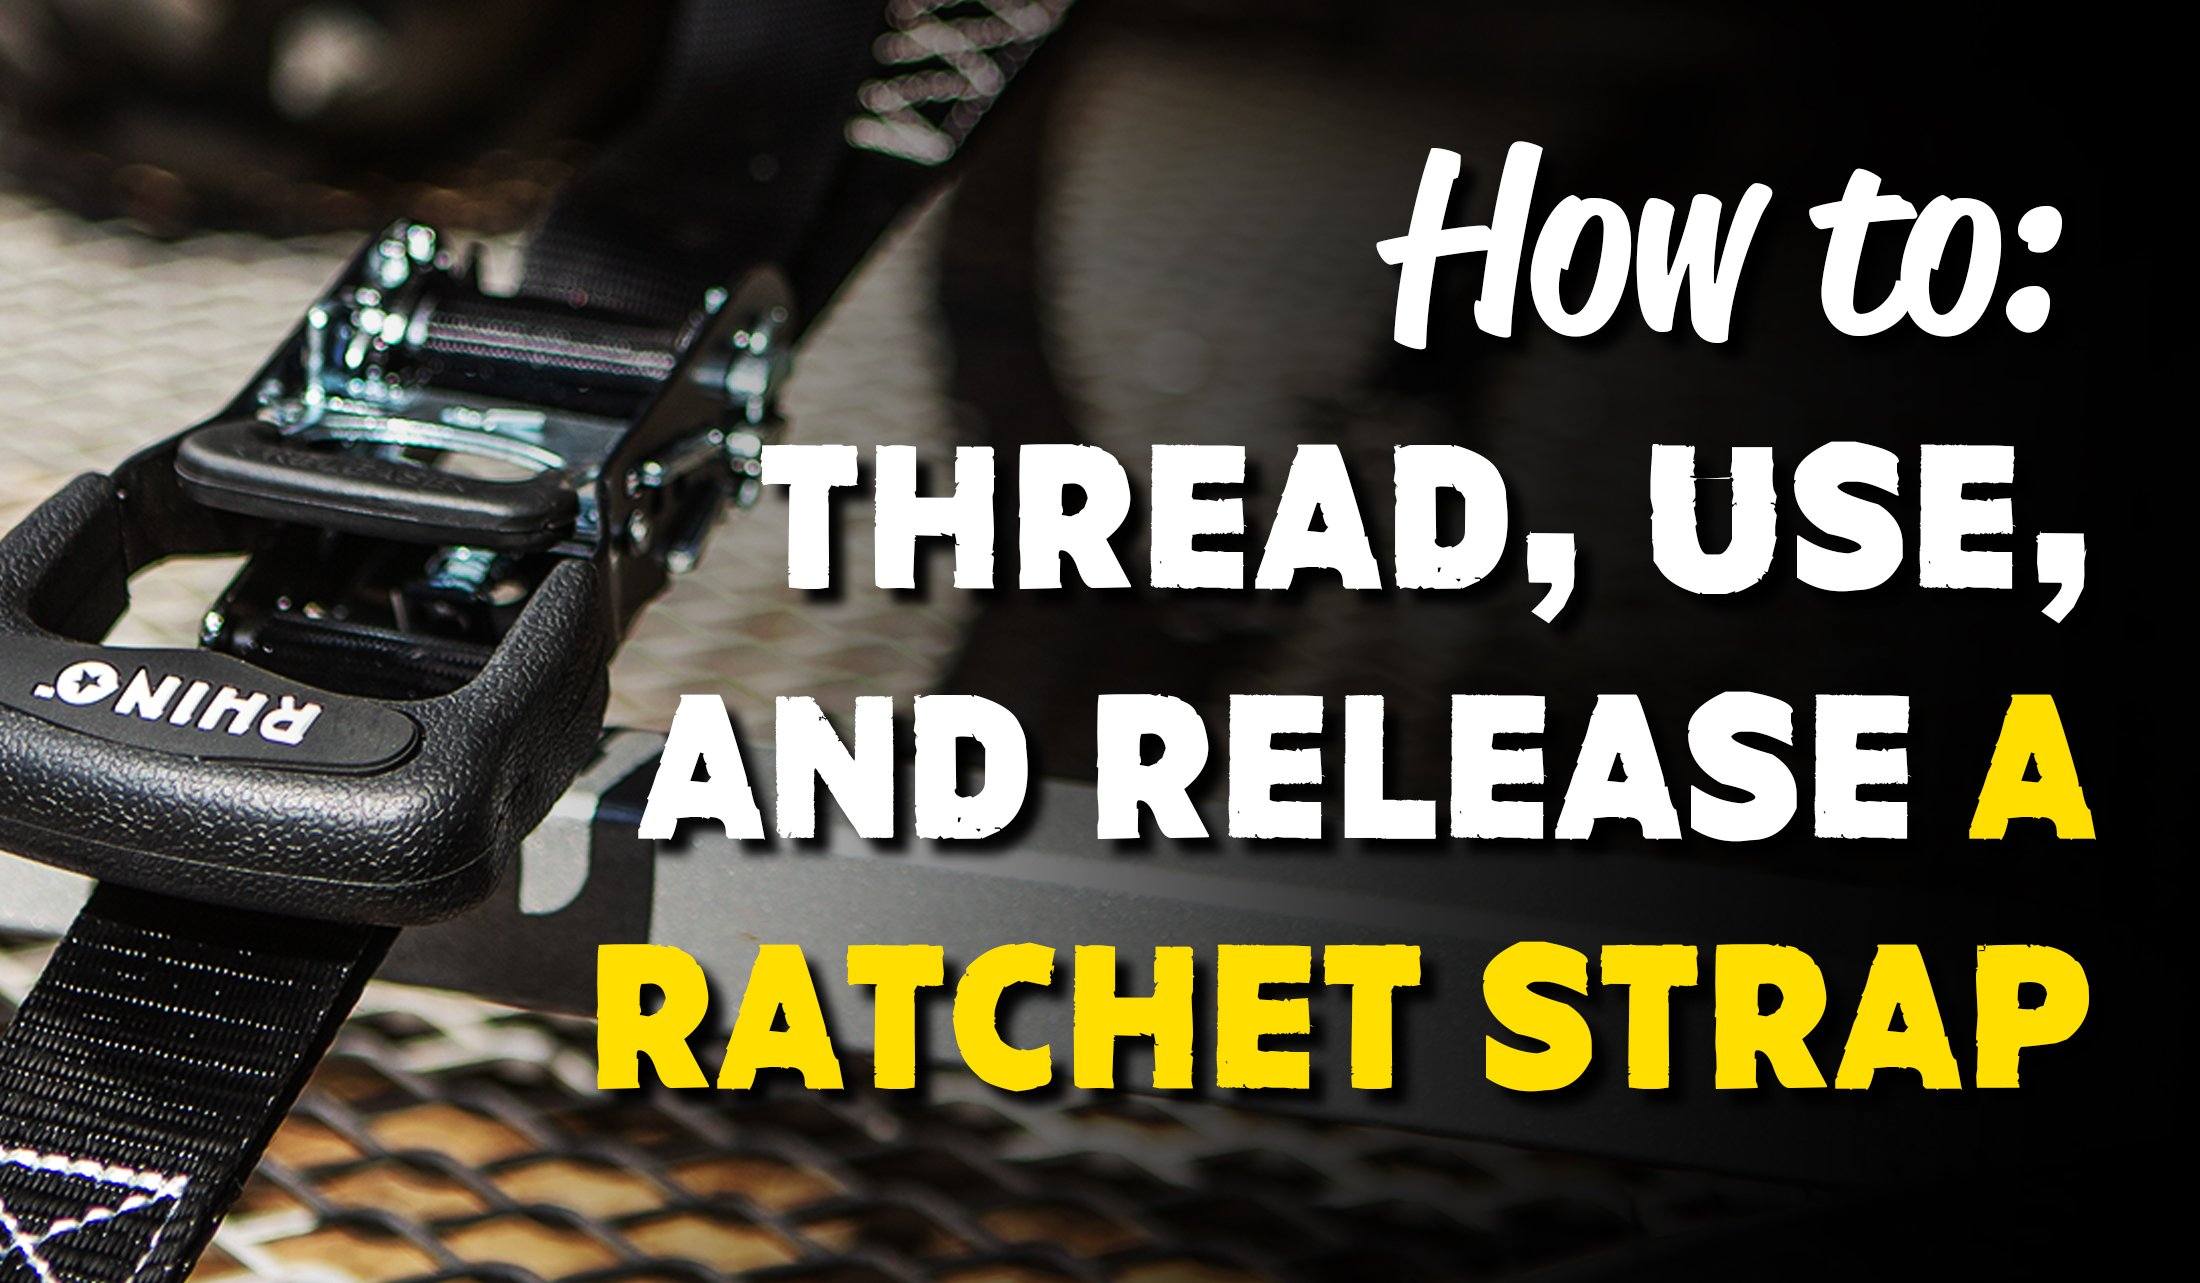 How to Thread, Use, and Release a Ratchet Strap